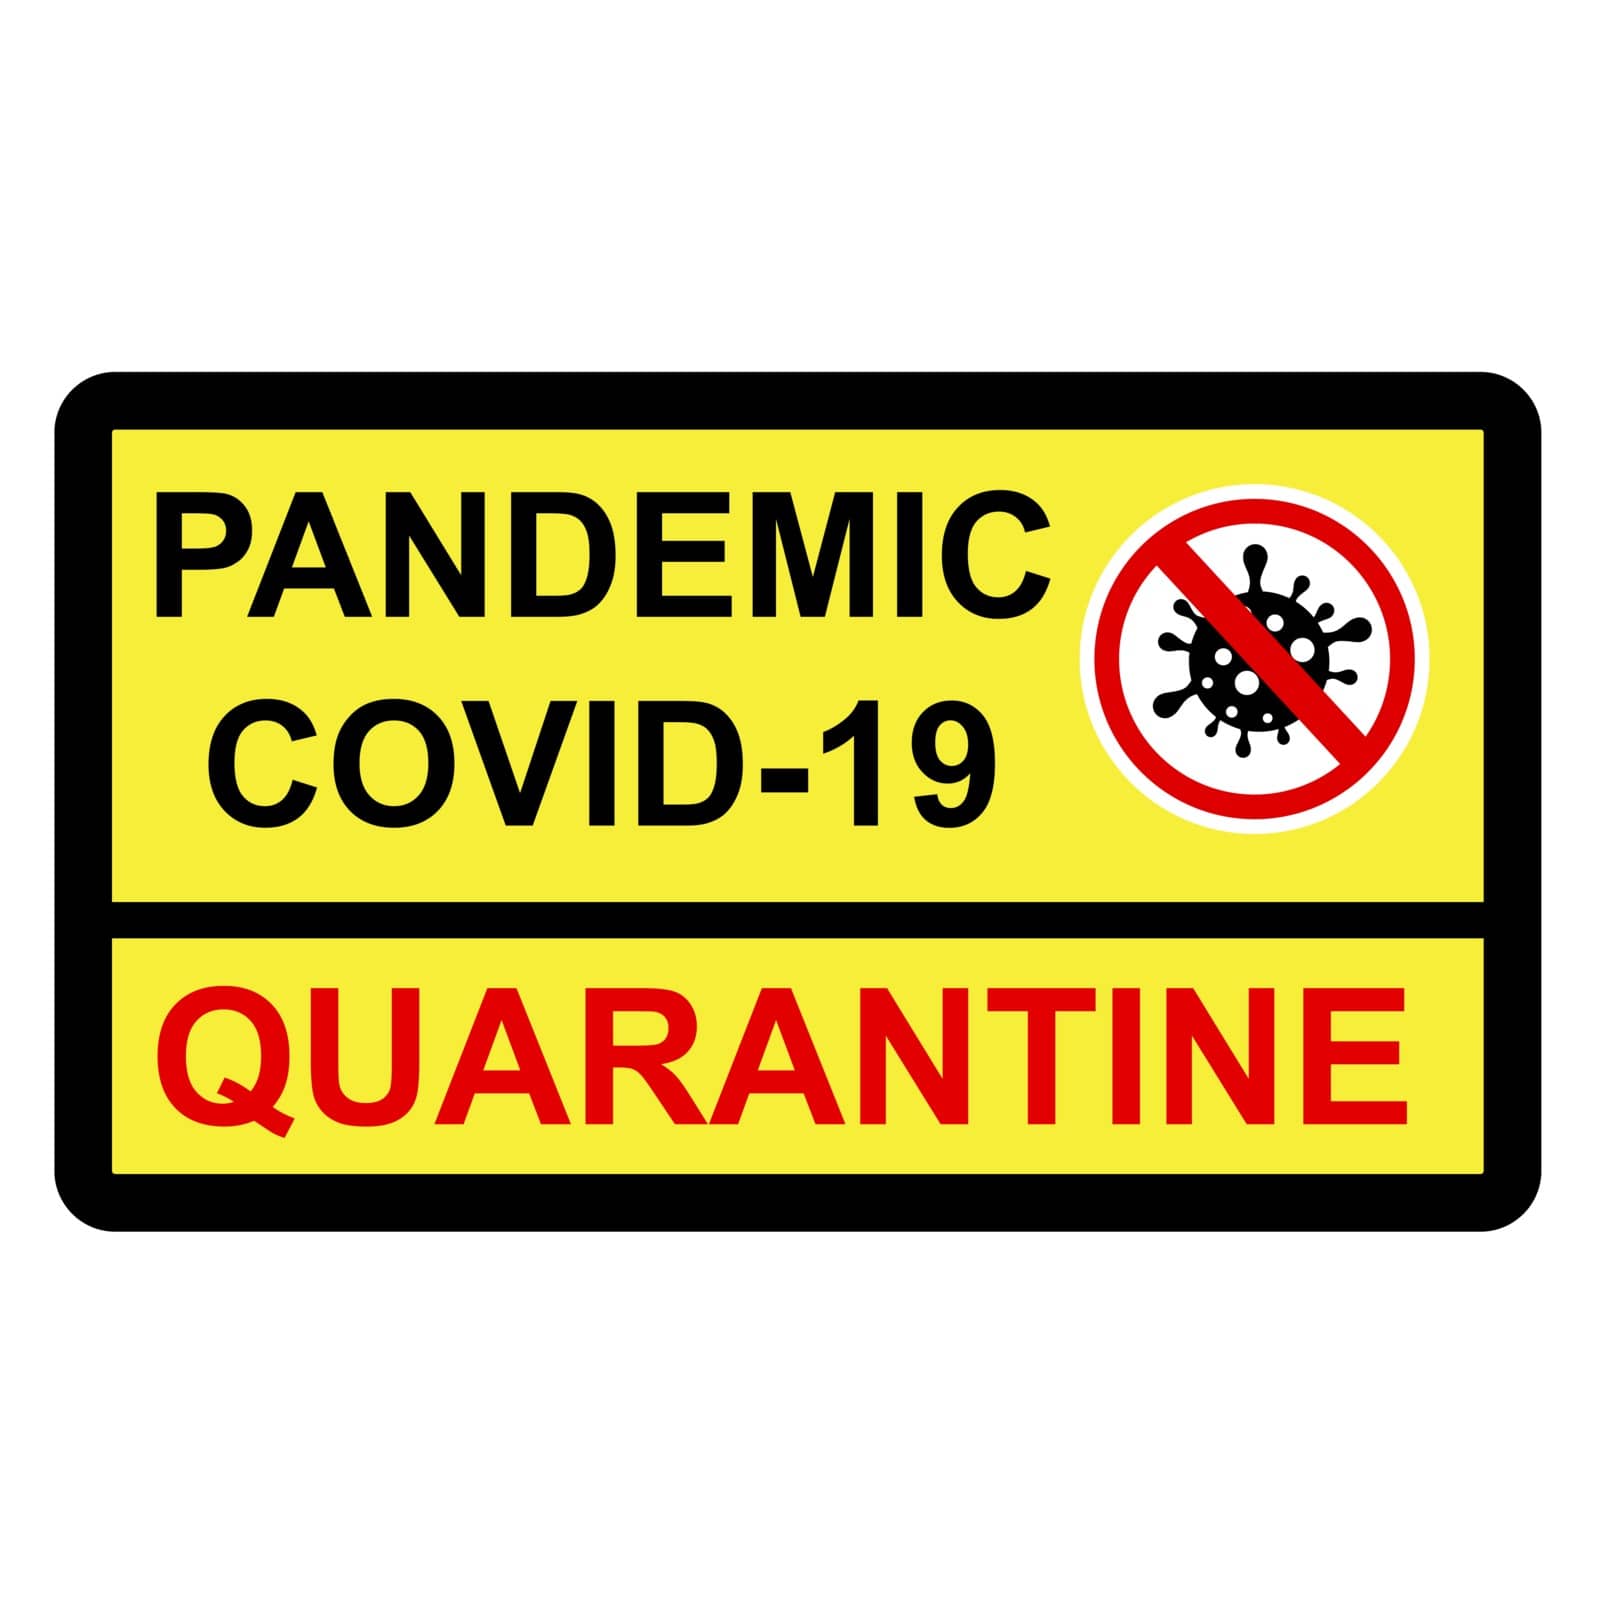 Vector Sign Caution Warning, Quarantine Outbreak Alert from Covid-19